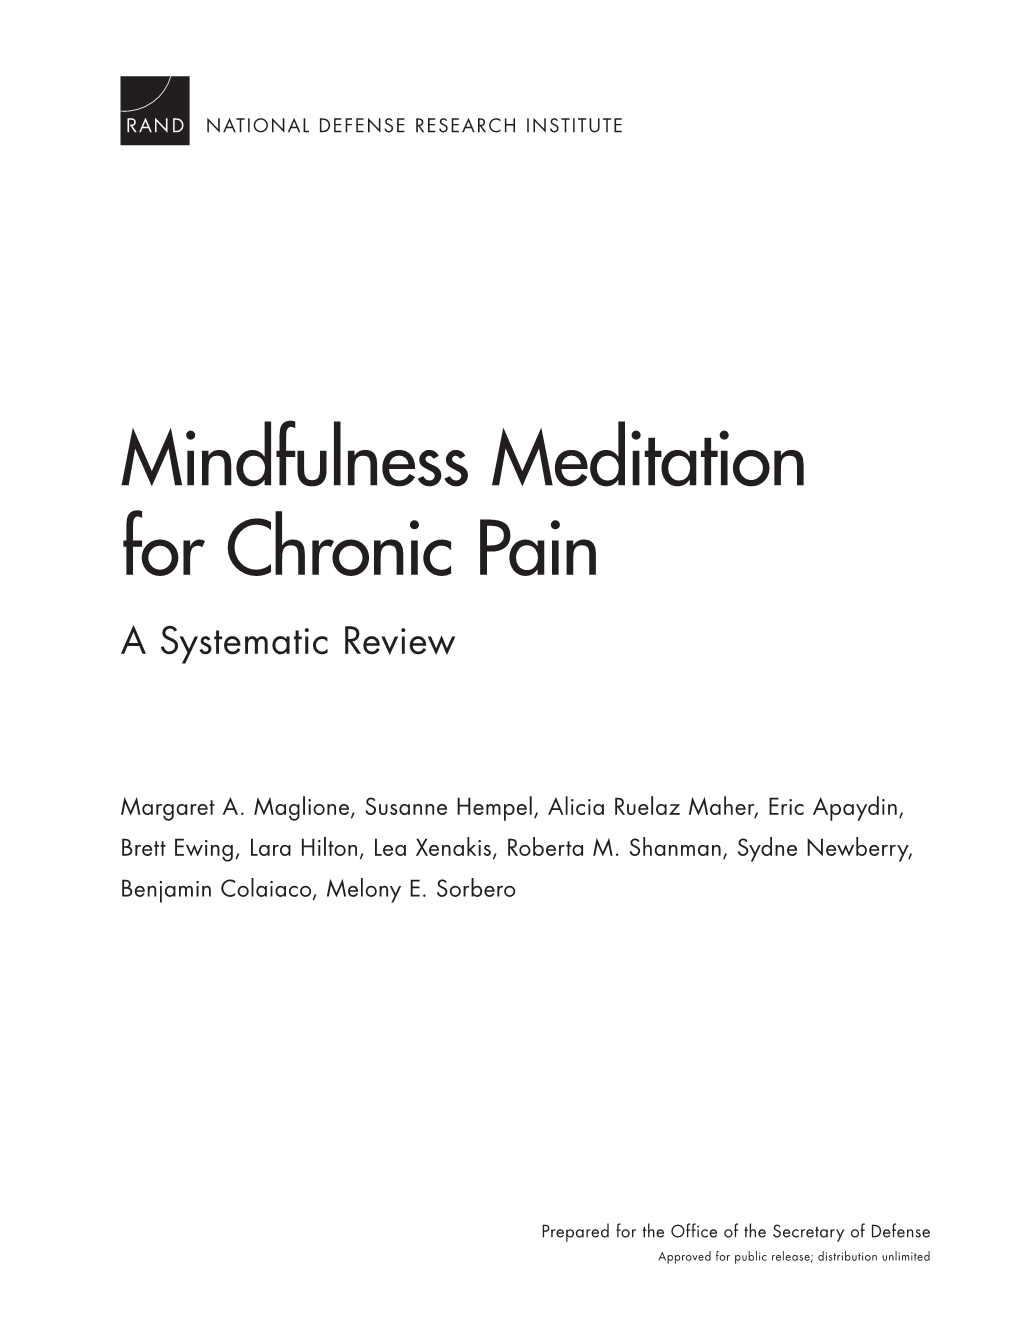 Mindfulness Meditation for Chronic Pain a Systematic Review